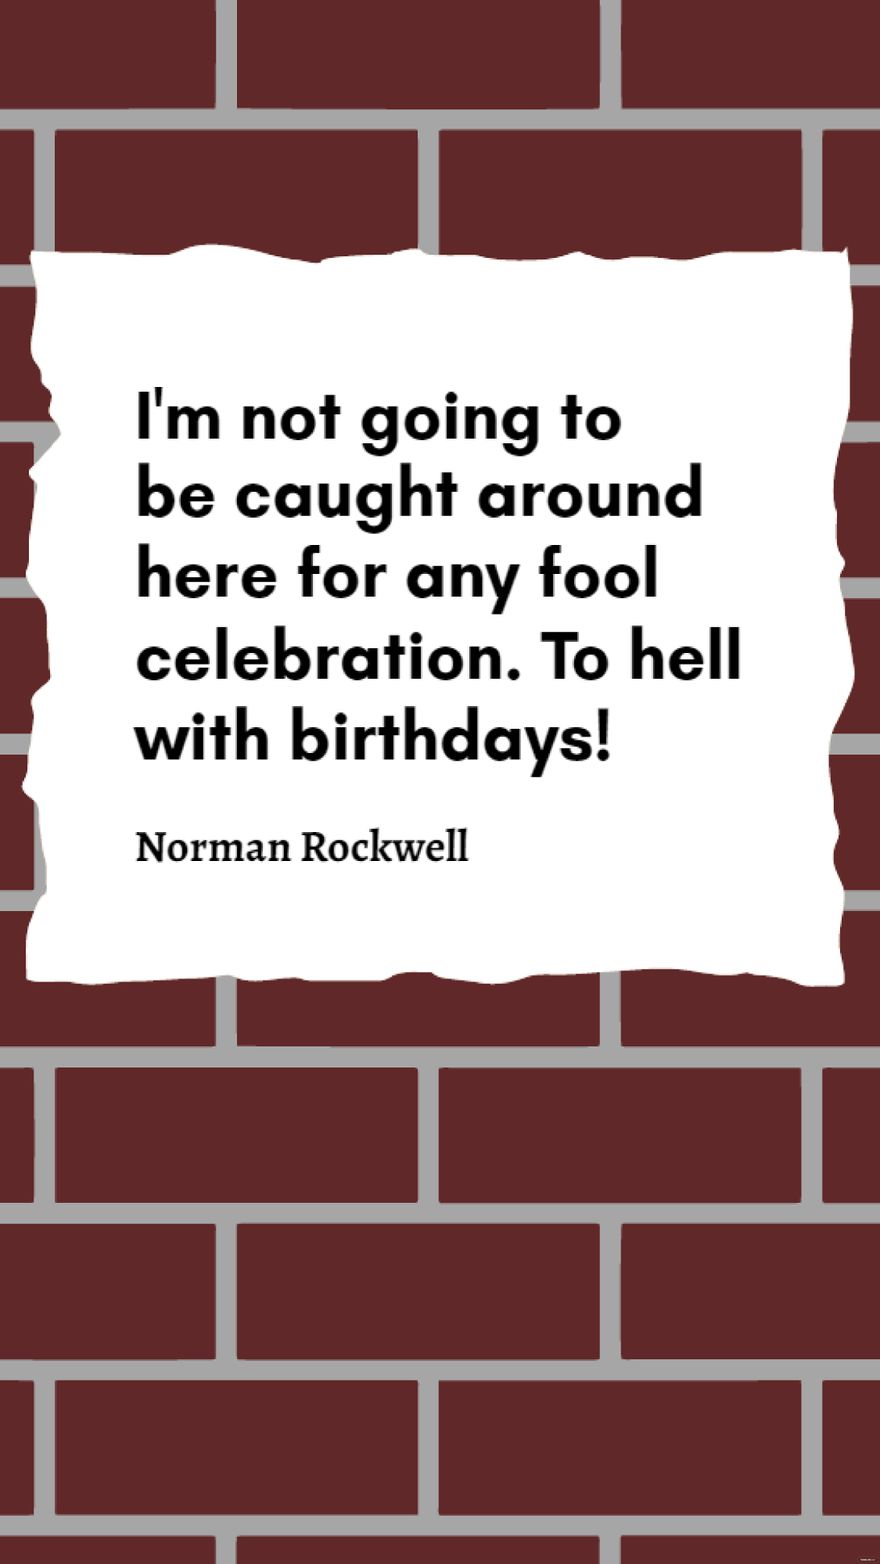 Norman Rockwell - I'm not going to be caught around here for any fool celebration. To hell with birthdays! in JPG